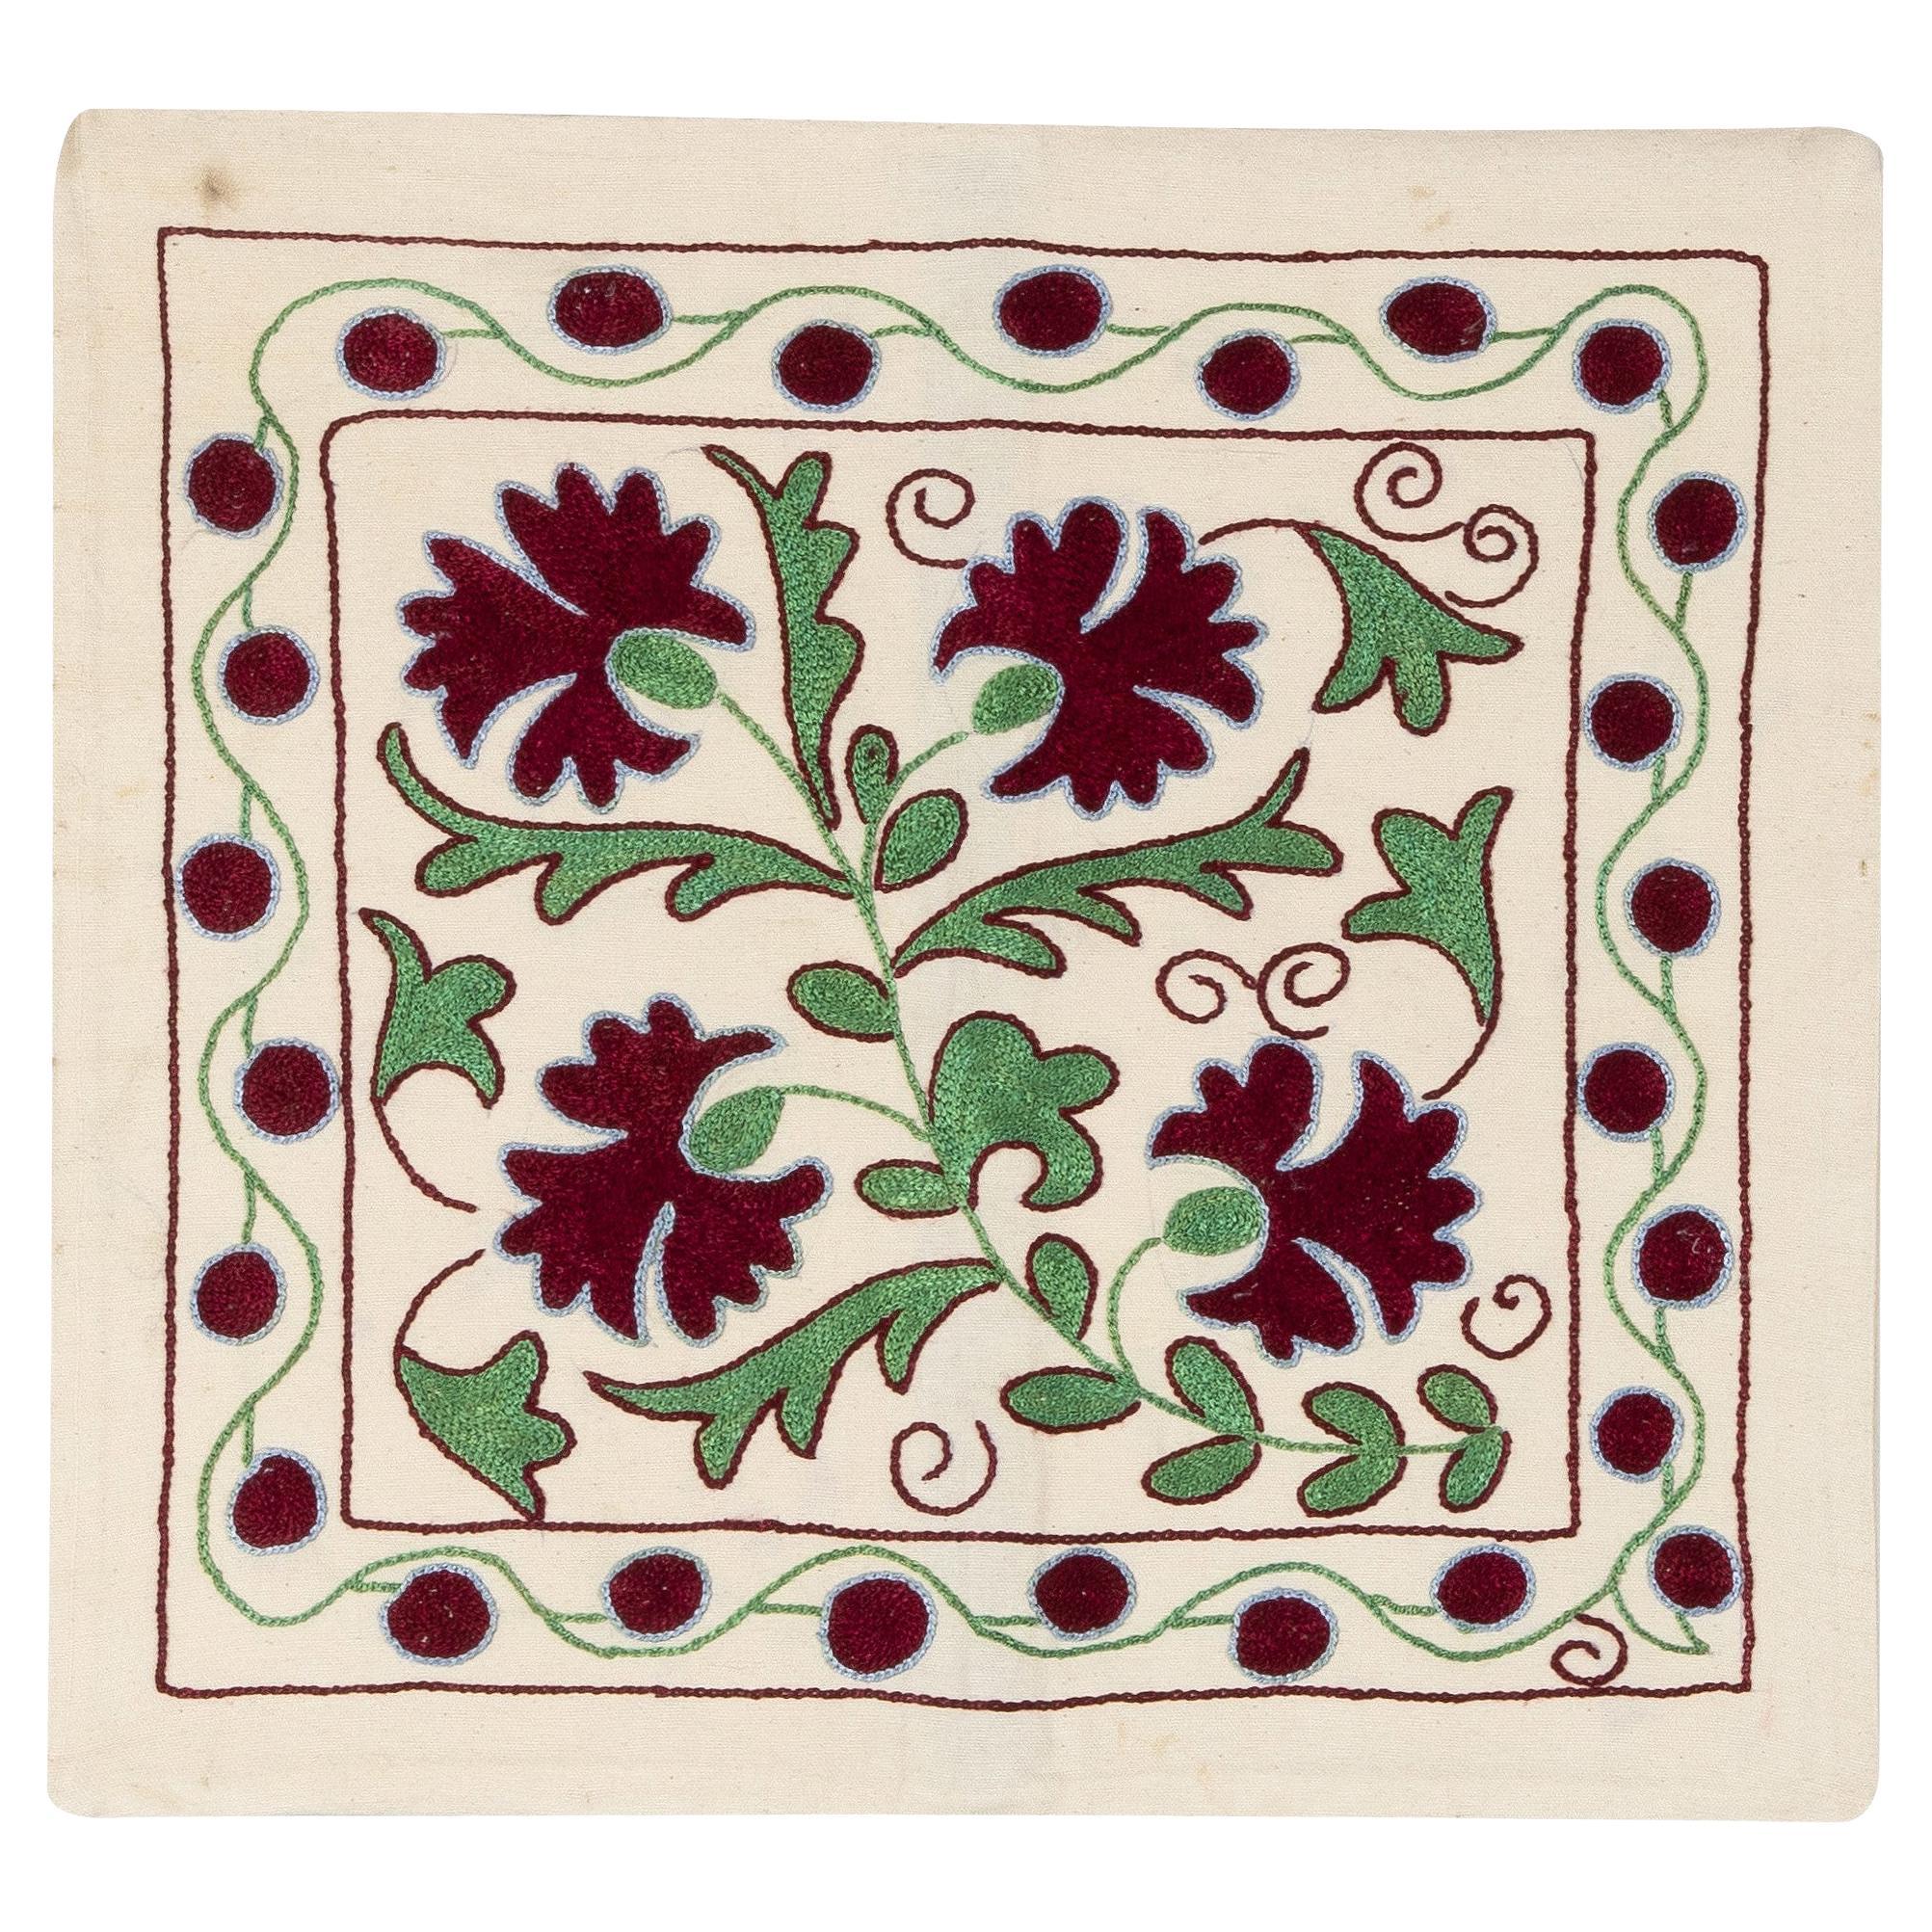 19"x19" Handmade Silk Embroidered Cushion Cover in Burgundy Red, Cream & Green For Sale